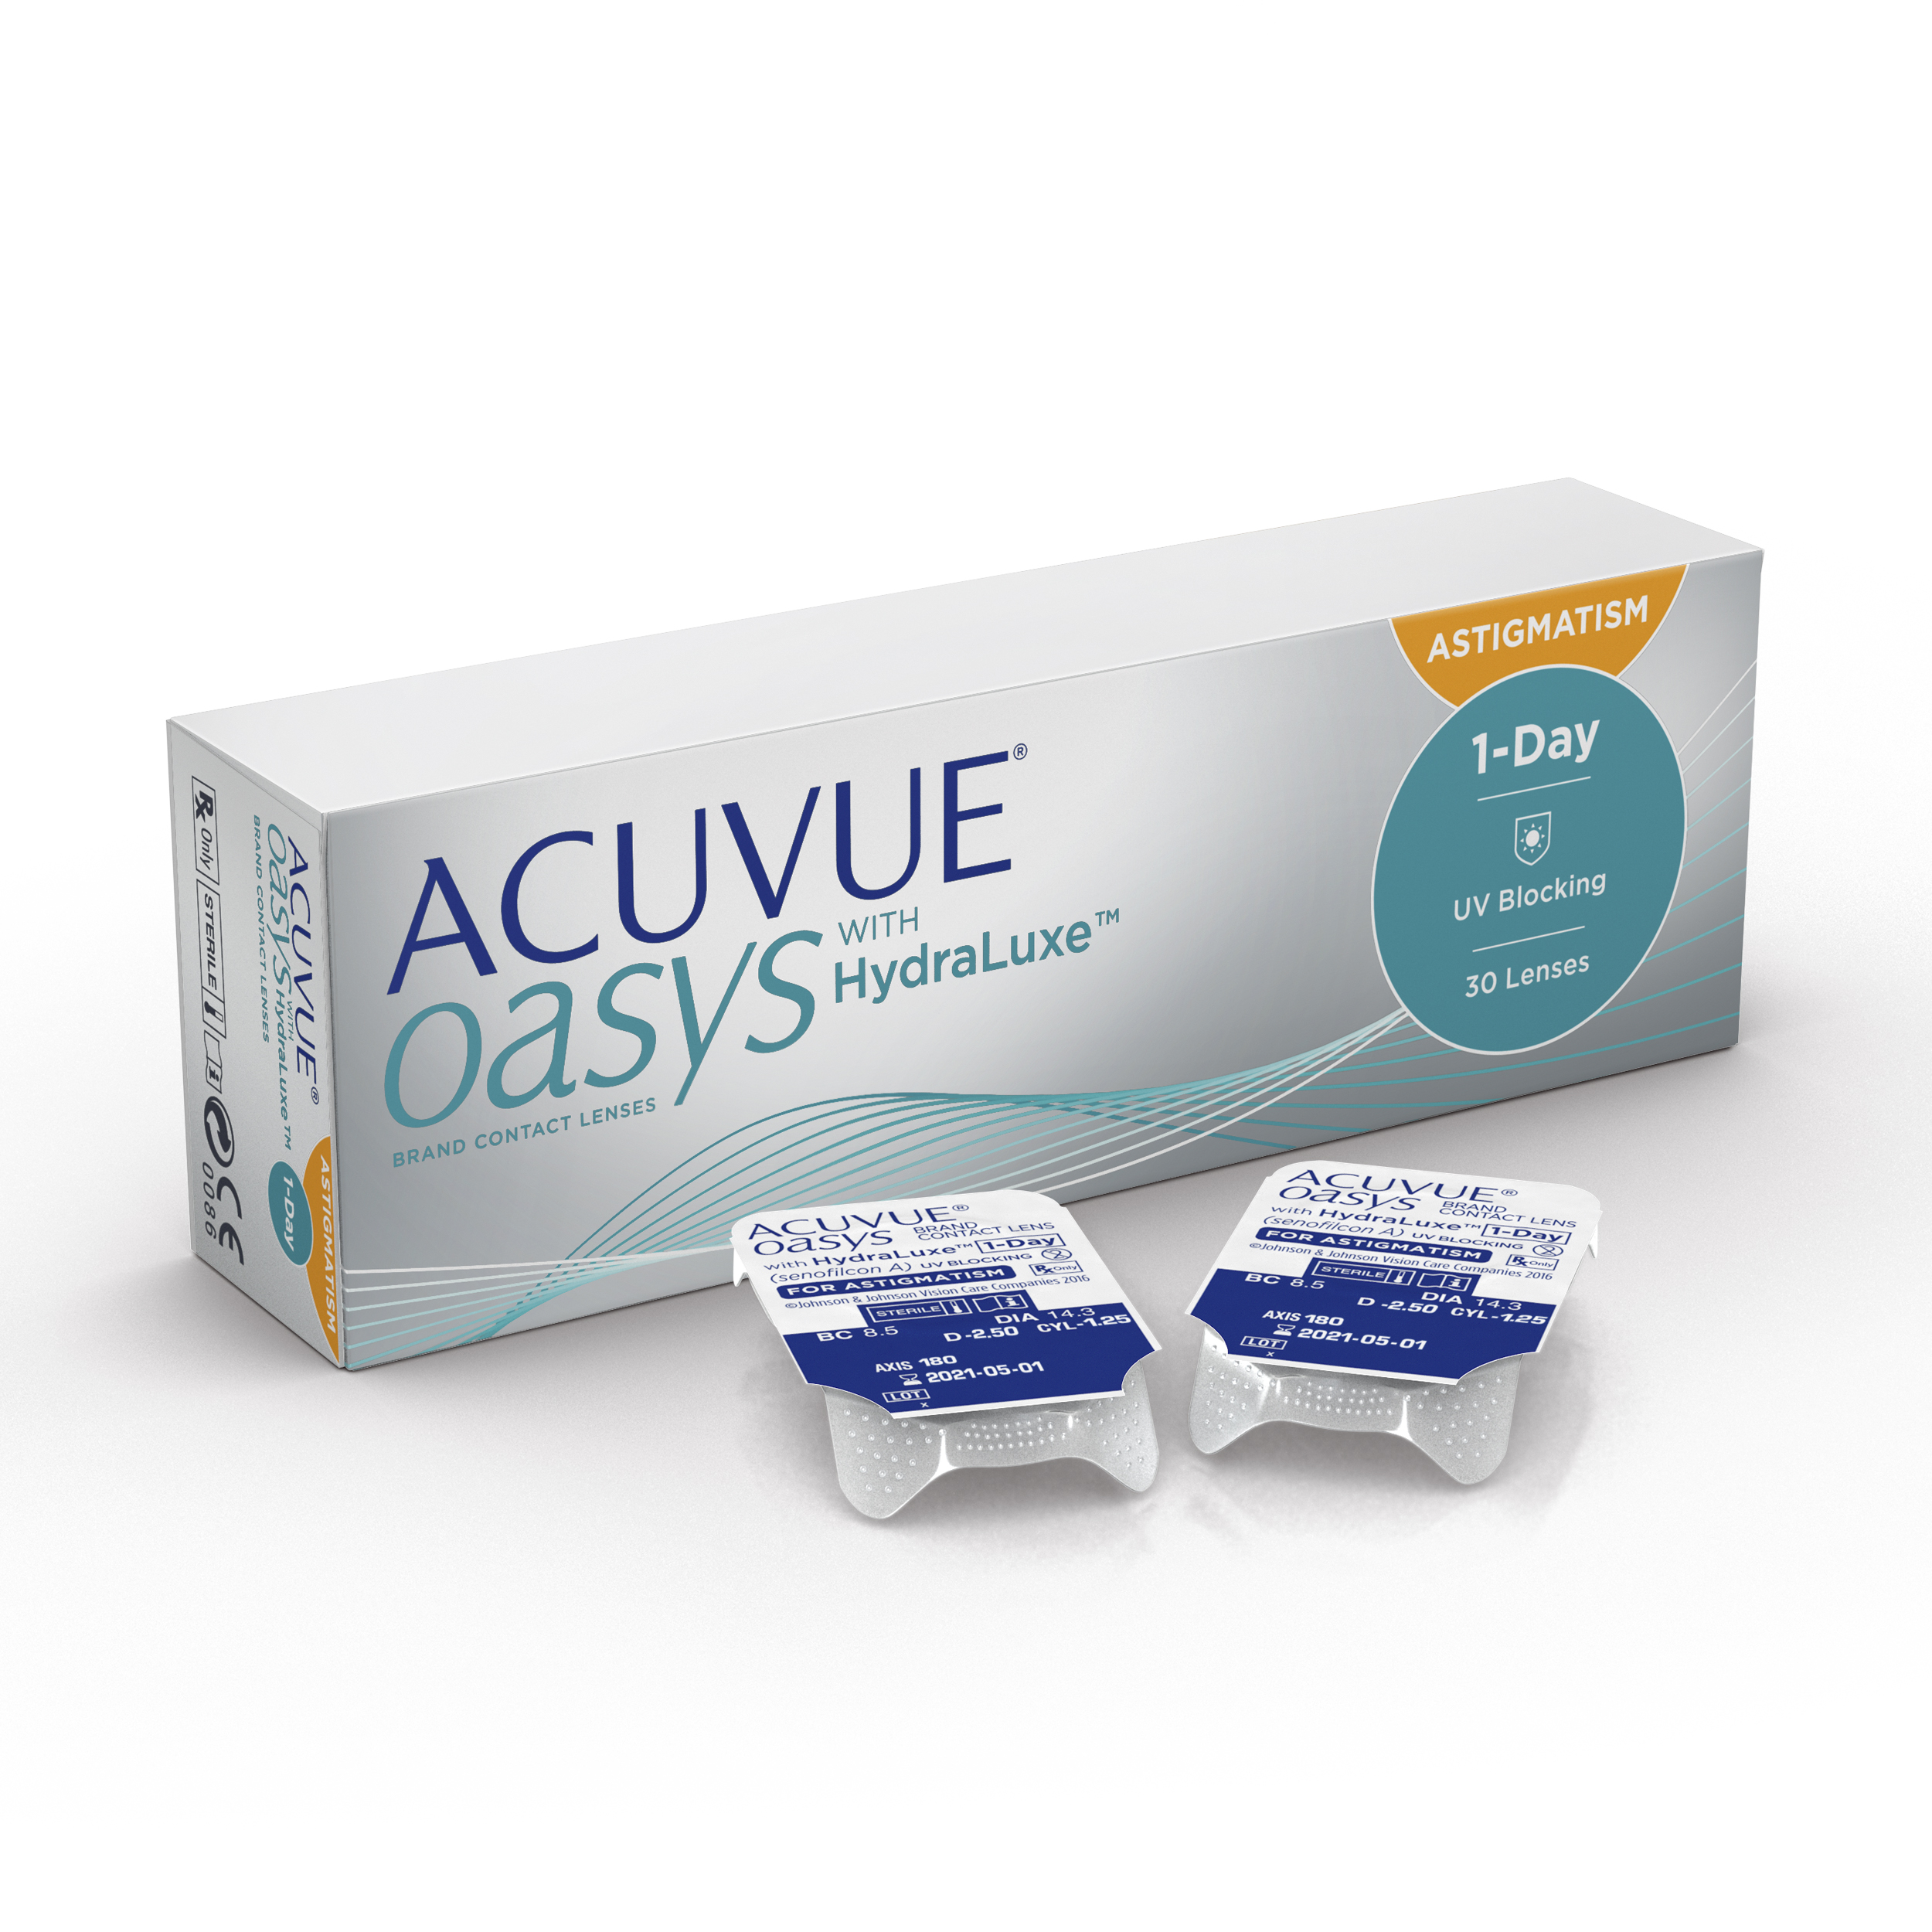 What Is Acuvue Oasys For Astigmatism